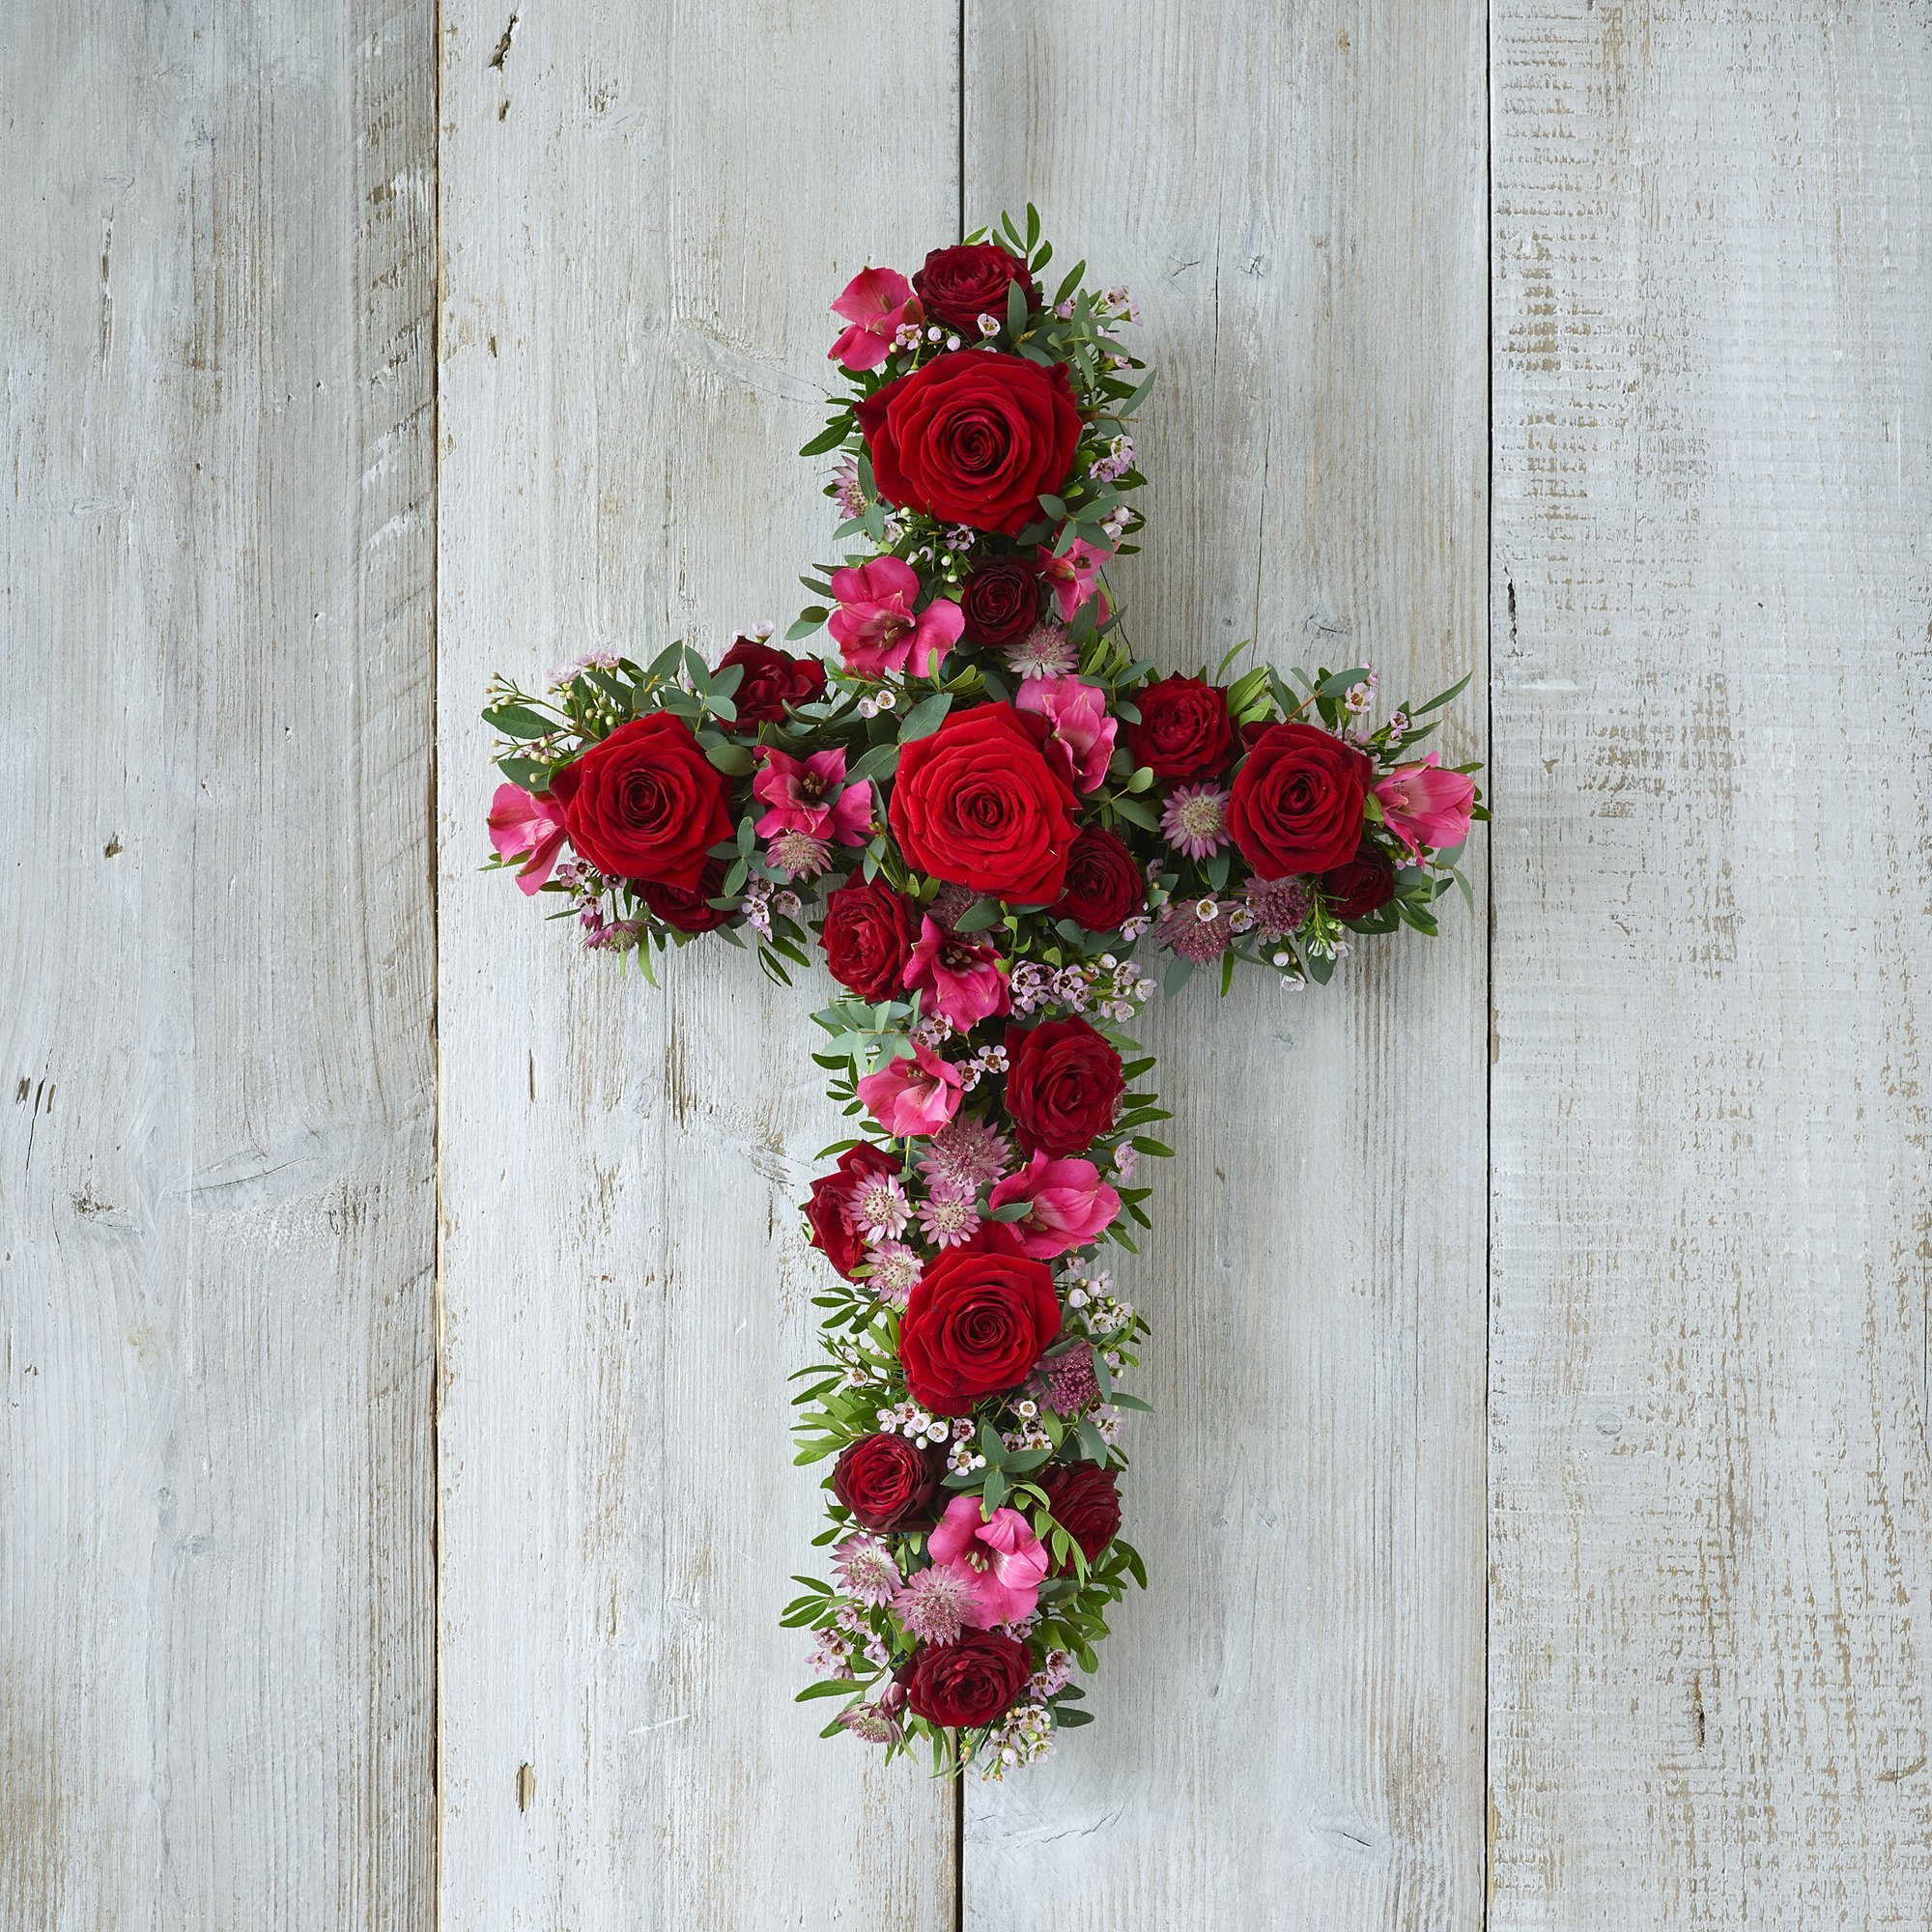 Red and Pink Cross image